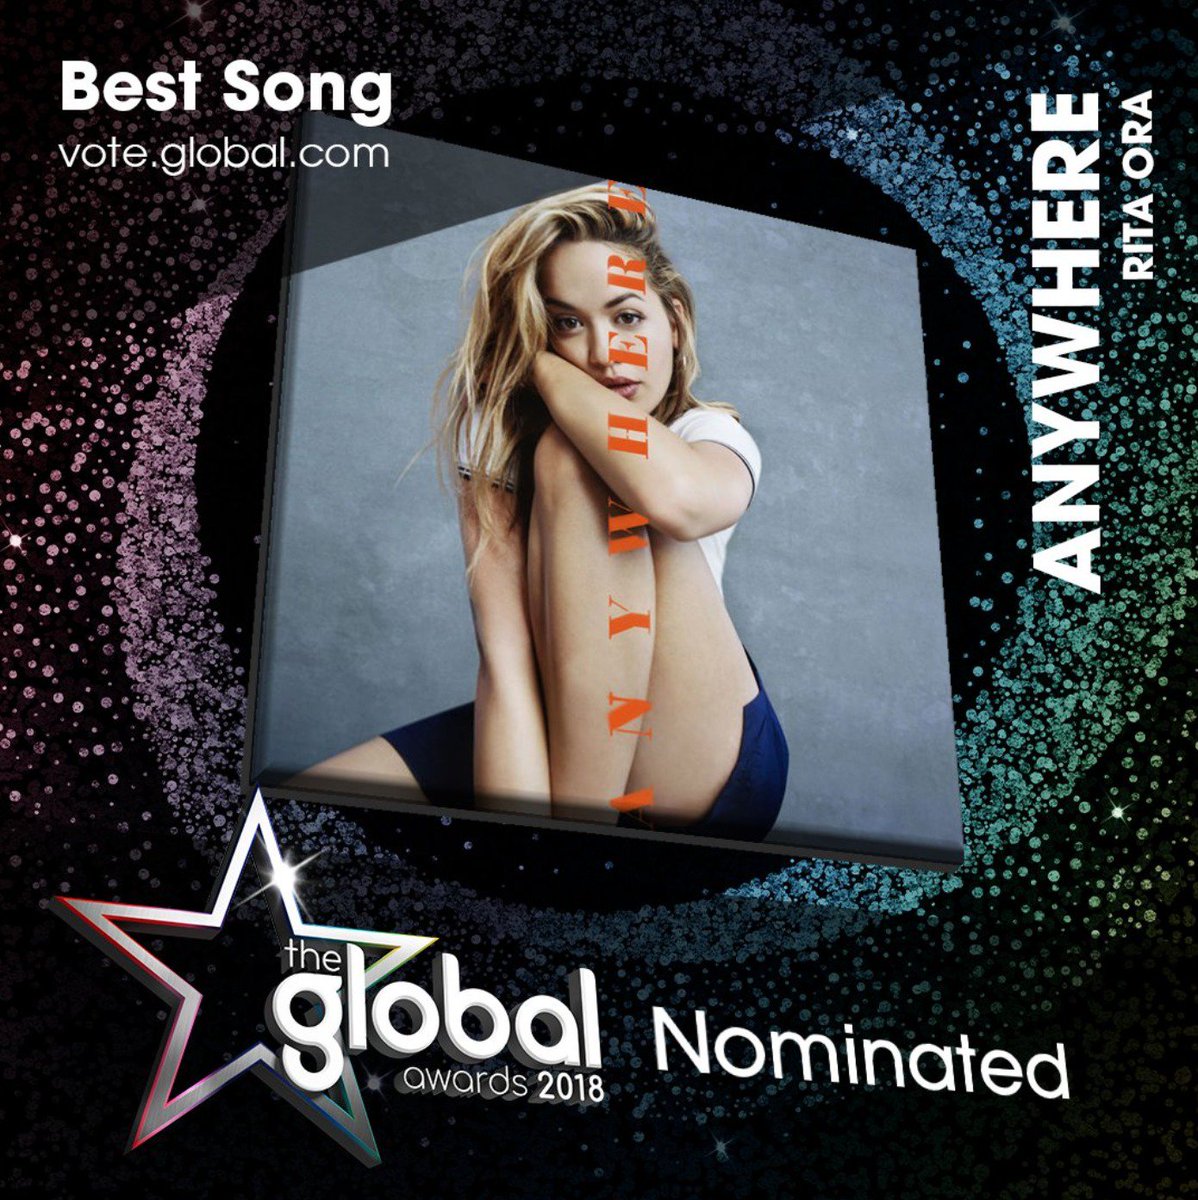 ❤️❤️ WOW!! Anywhere is up for Best Song at #TheGlobalAwards!!  https://t.co/3Qhb1LMPqz????????⭐️???????? https://t.co/fzI5lxvRtw